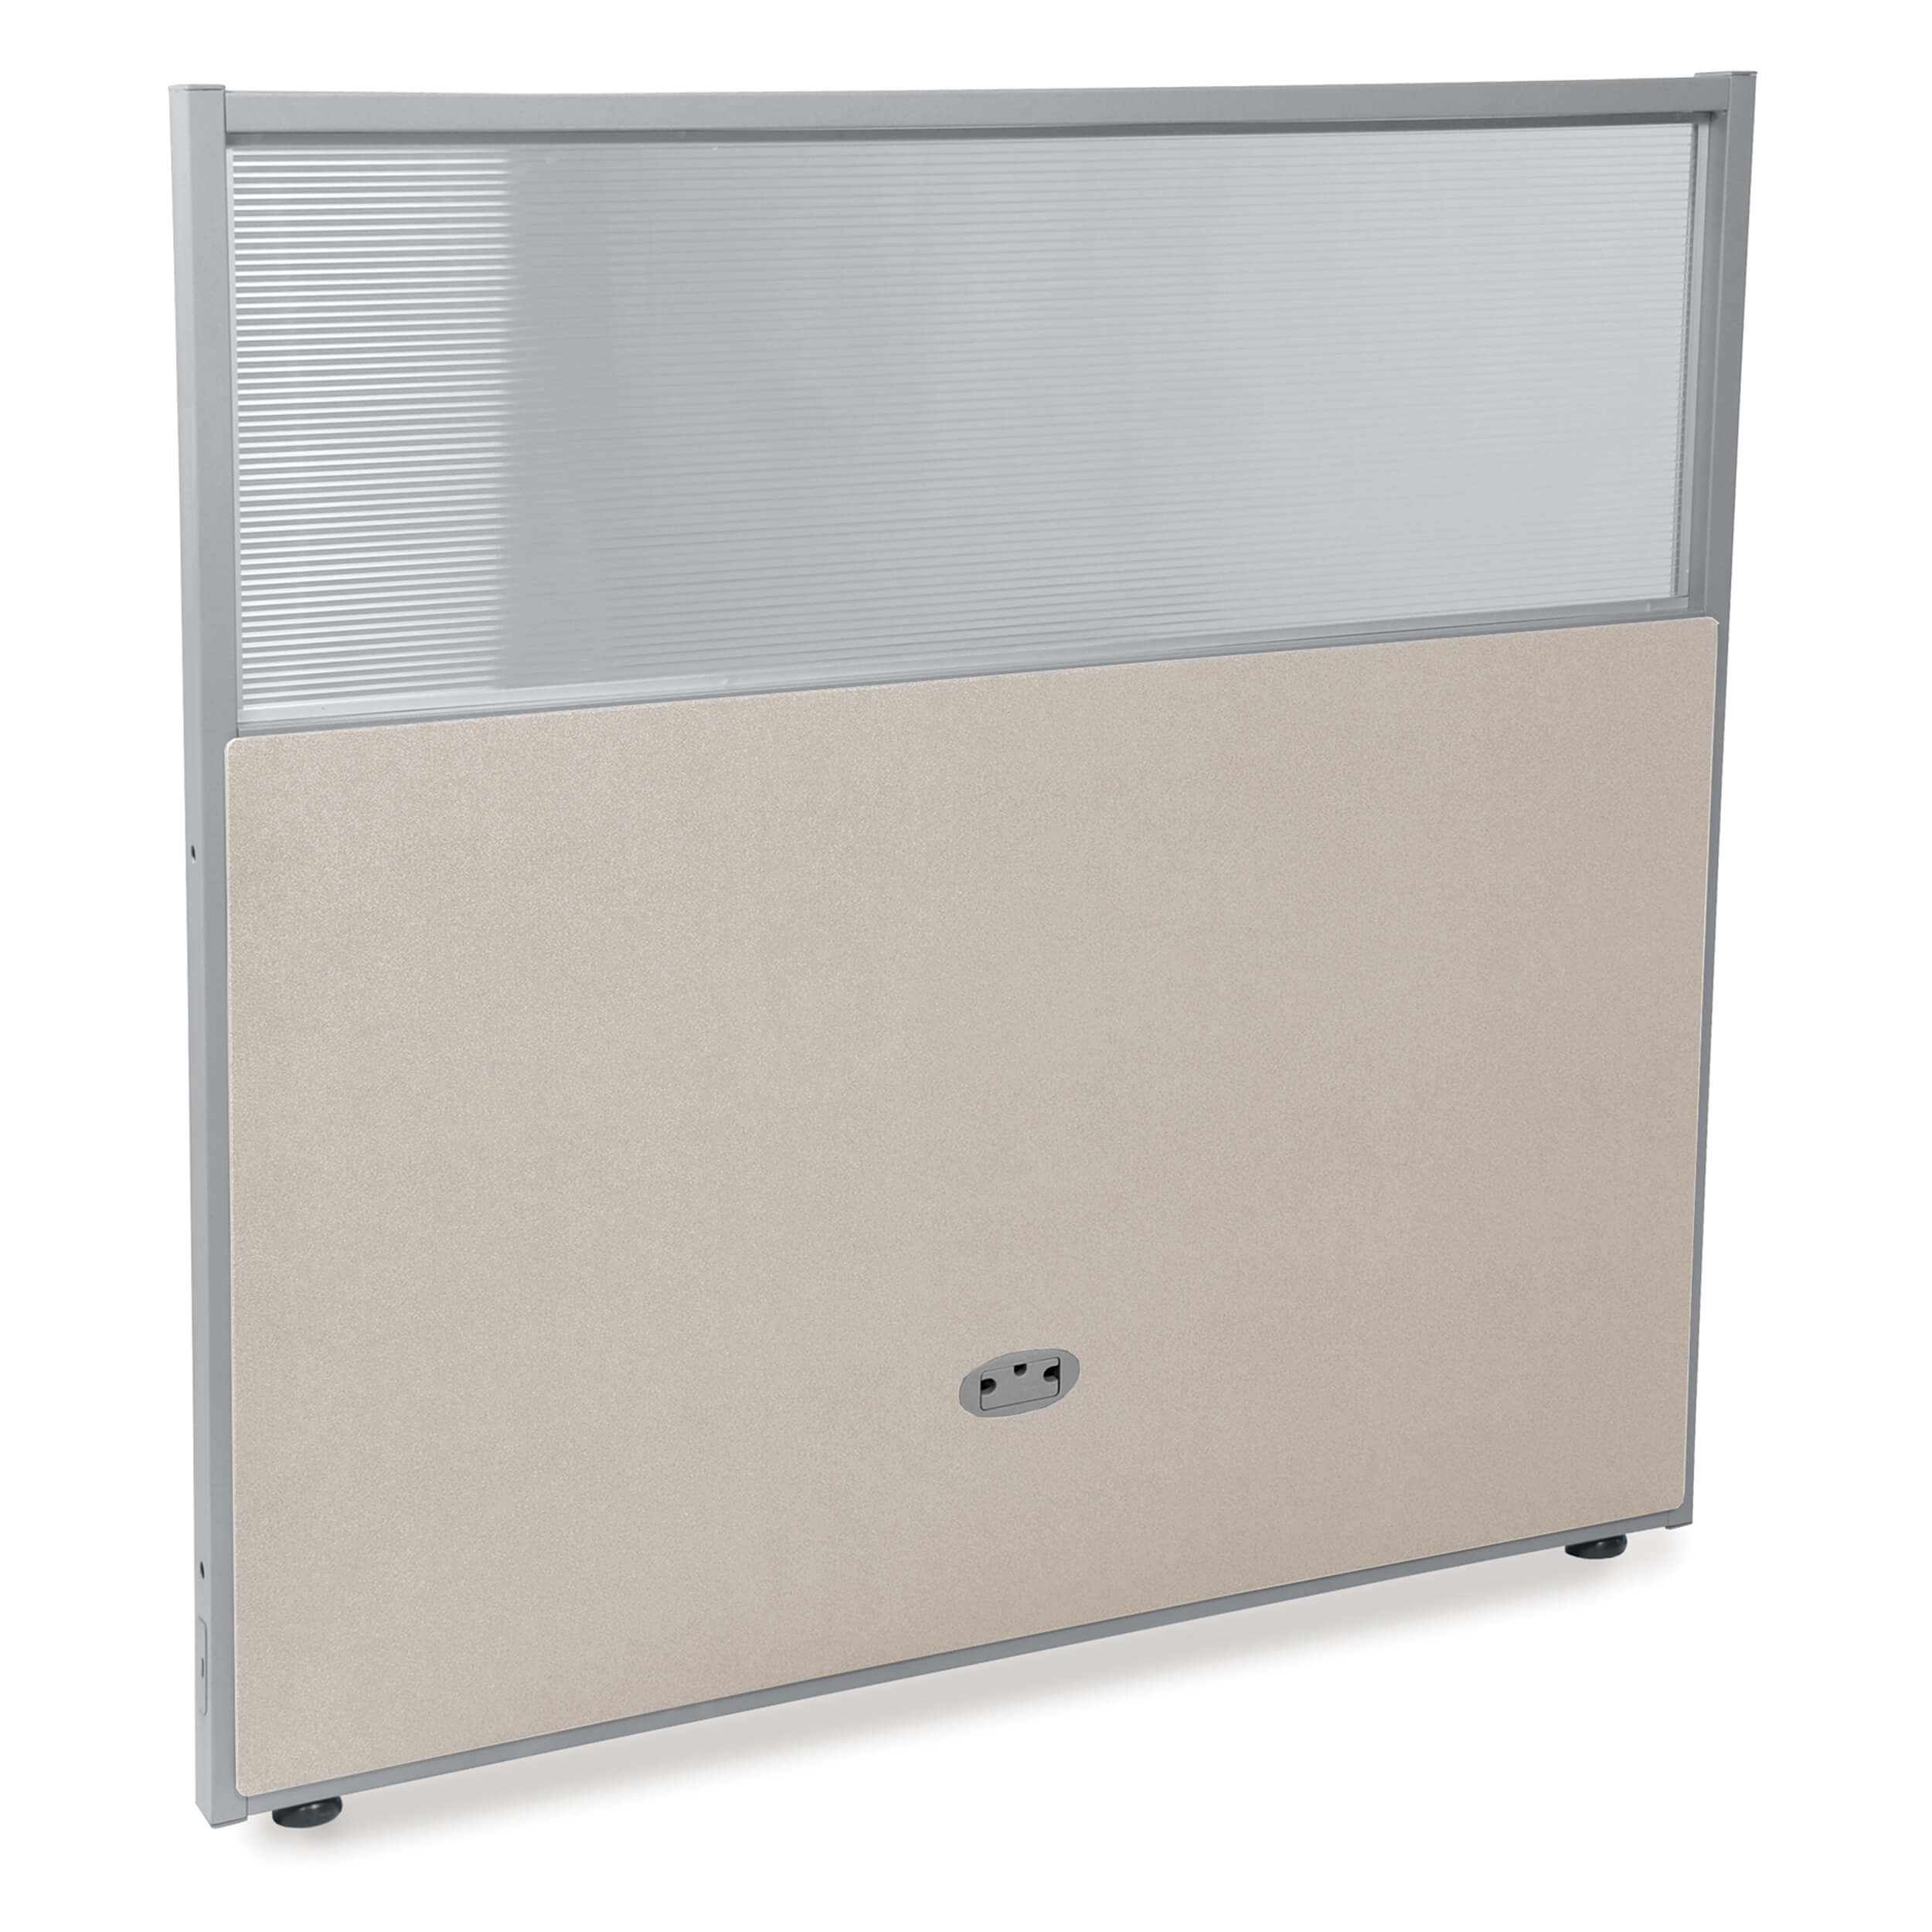 Privacy panels partition room divider